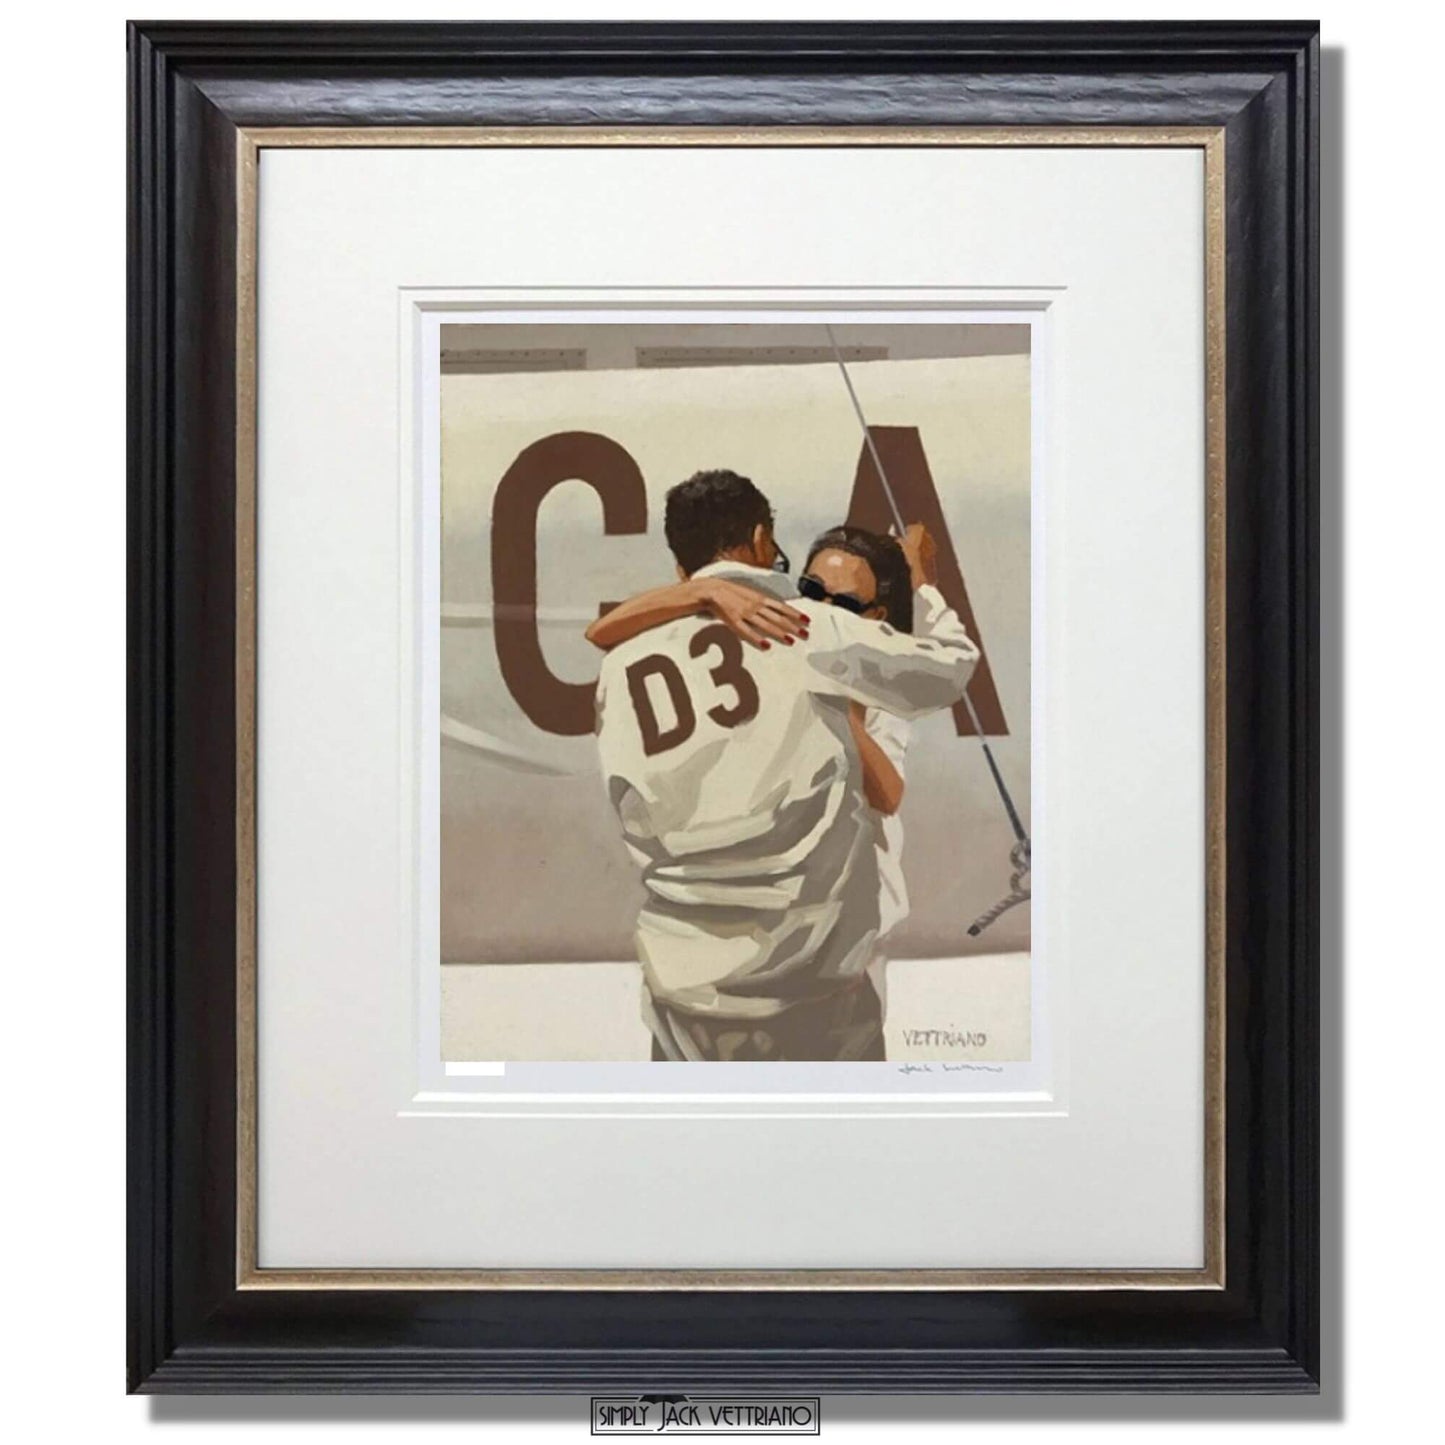 Ship of Dreams Tuiga Collection by Jack Vettriano Framed